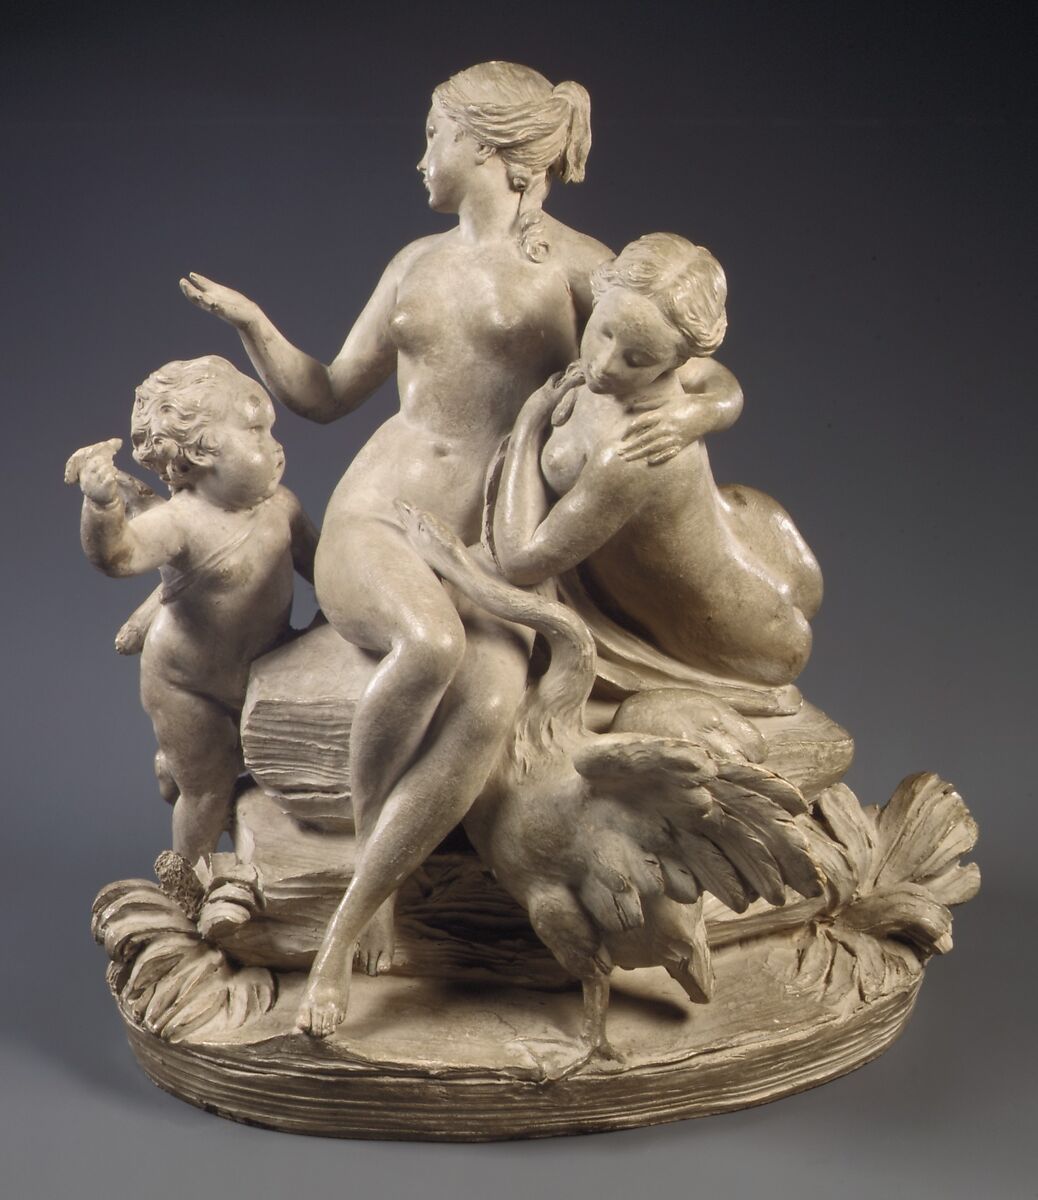 Based on a composition by Etienne-Maurice Falconet, Leda and the Swan, French